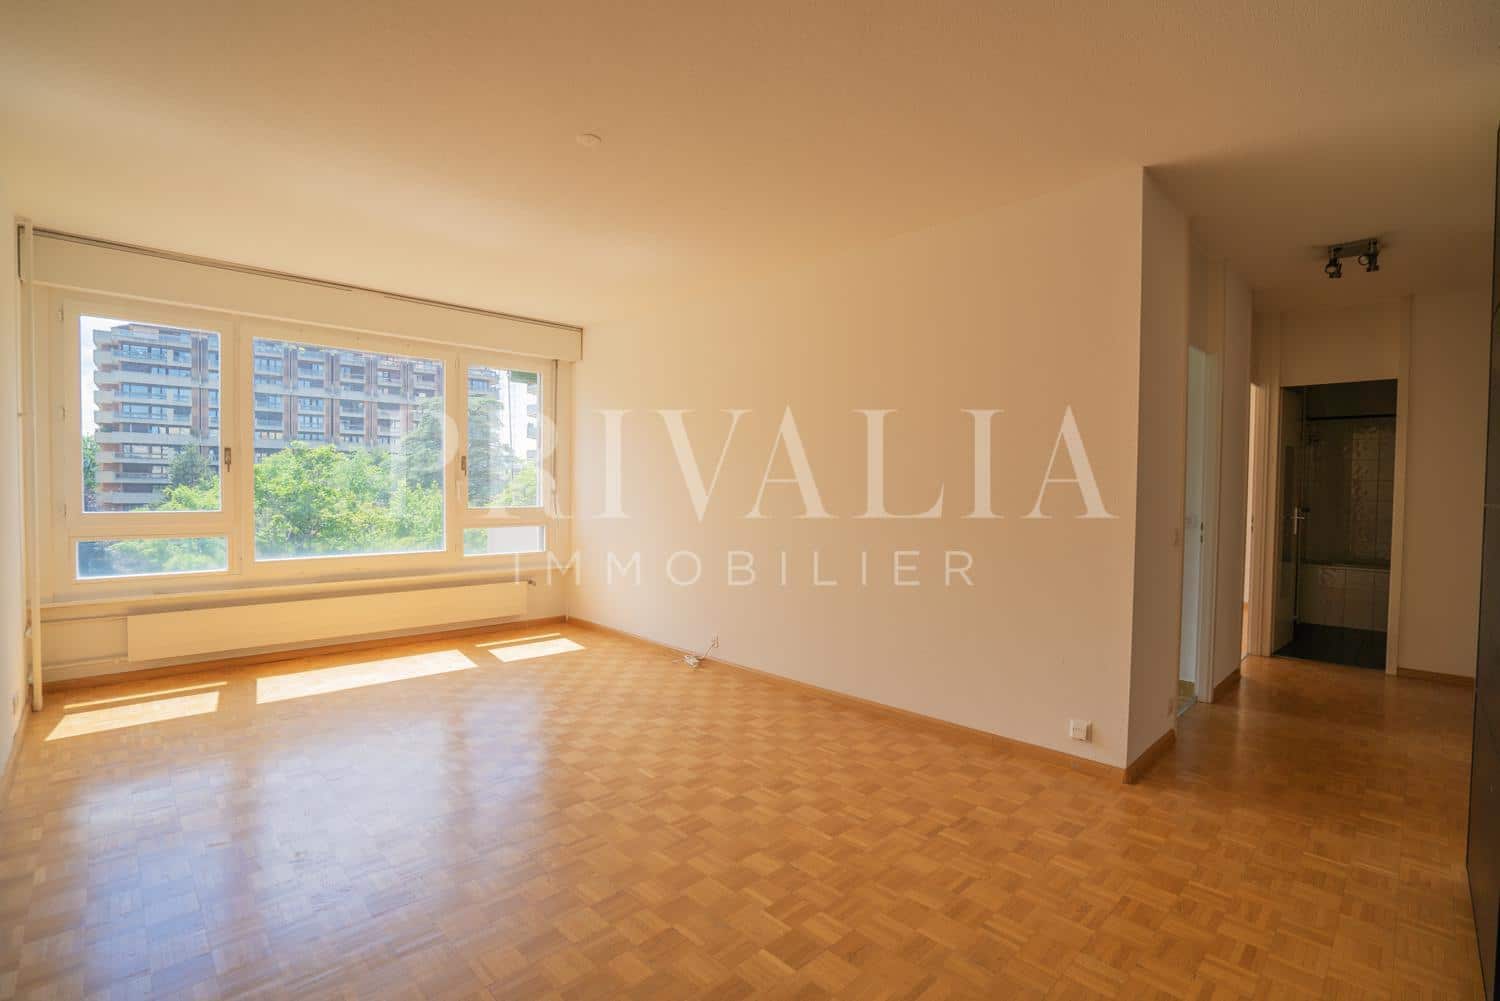 PrivaliaBeautiful 3-room apartment on a high floor with balcony